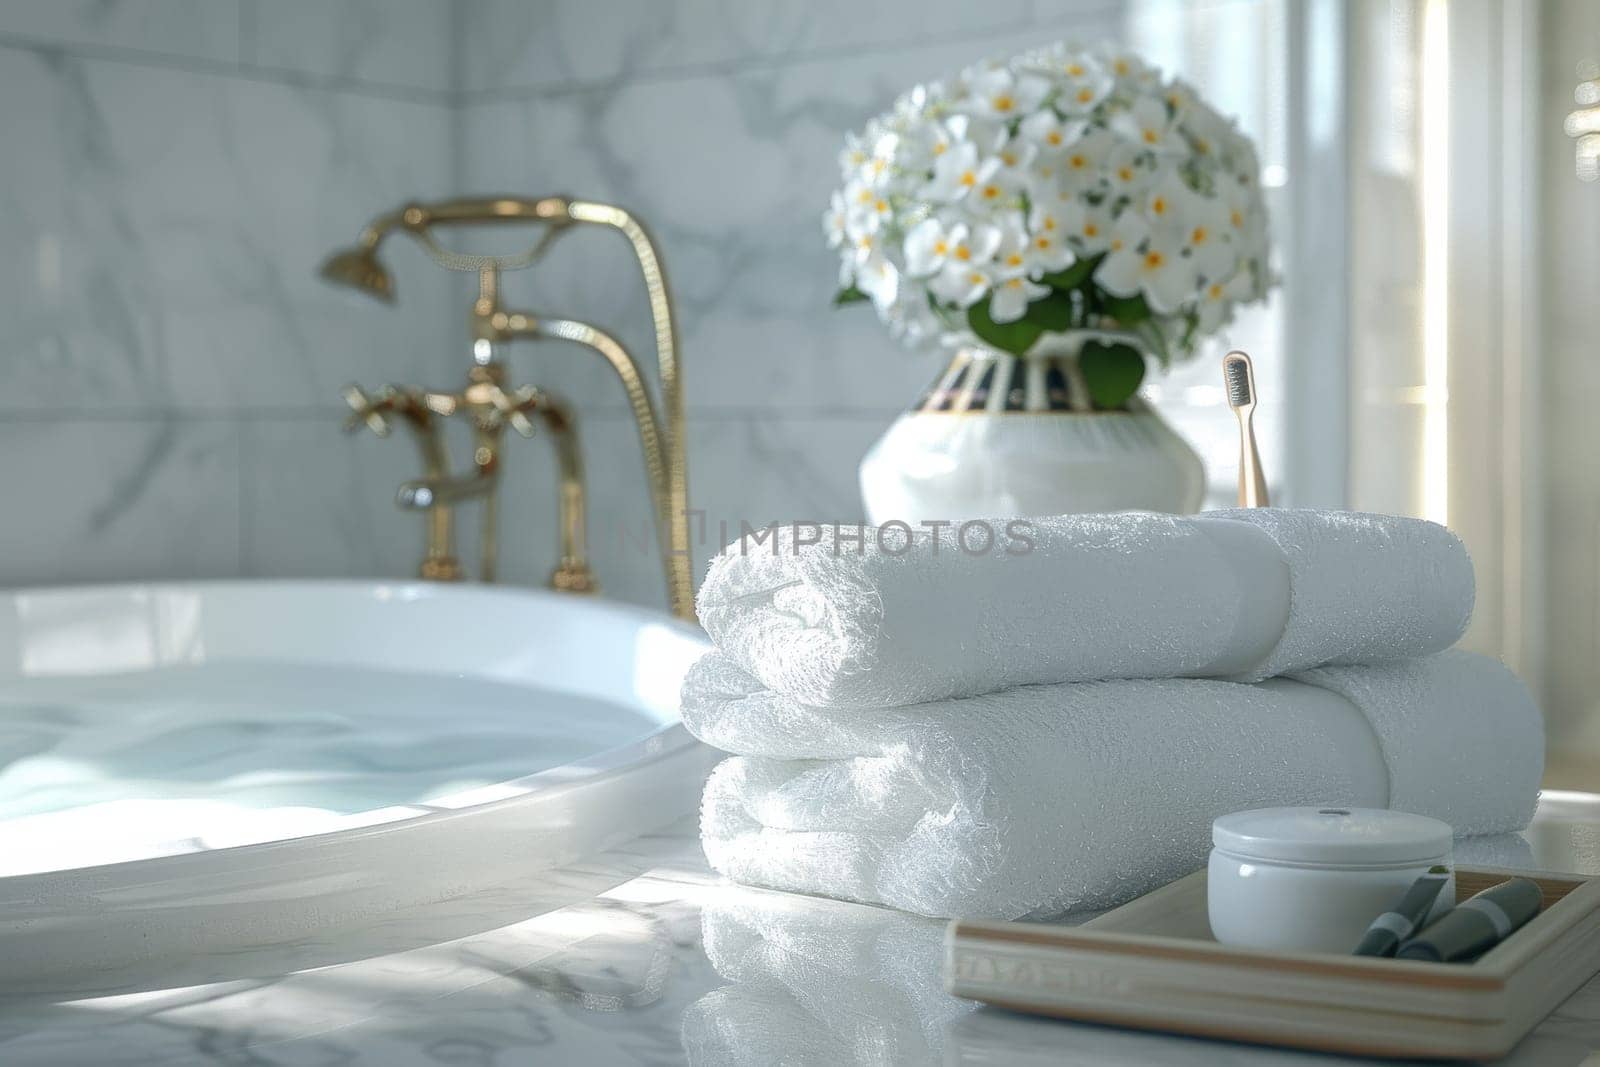 A bathroom with a bathtub, a vase with flowers, and a tray with a toothbrush and toothpaste